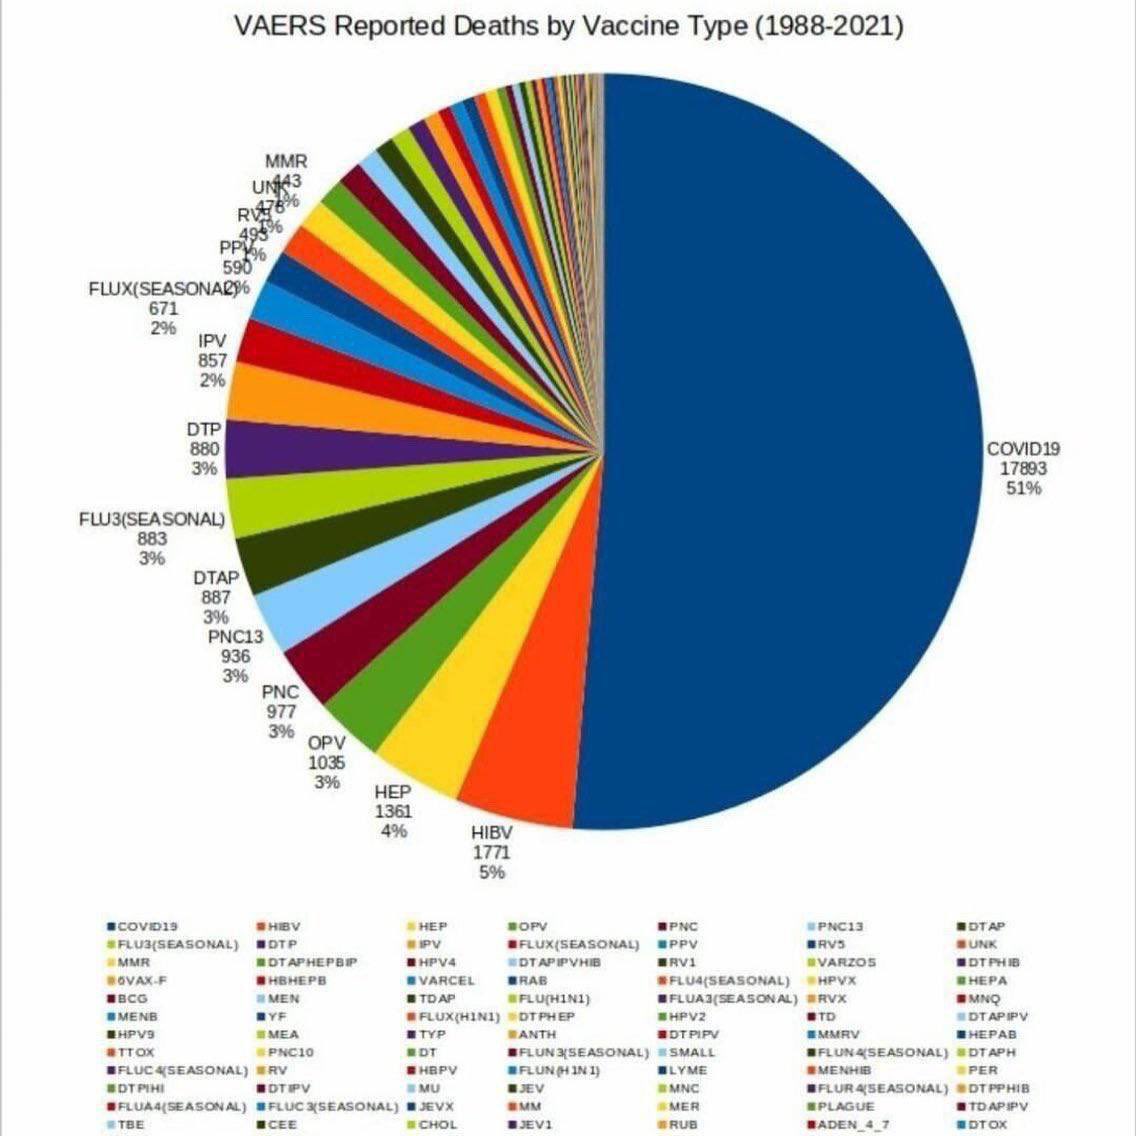 VAERS data on all vaccine deaths from 1988 to 2021.

Covid vaccine deaths in 1 year are equivalent to deaths of all other vaccines in 33 years.